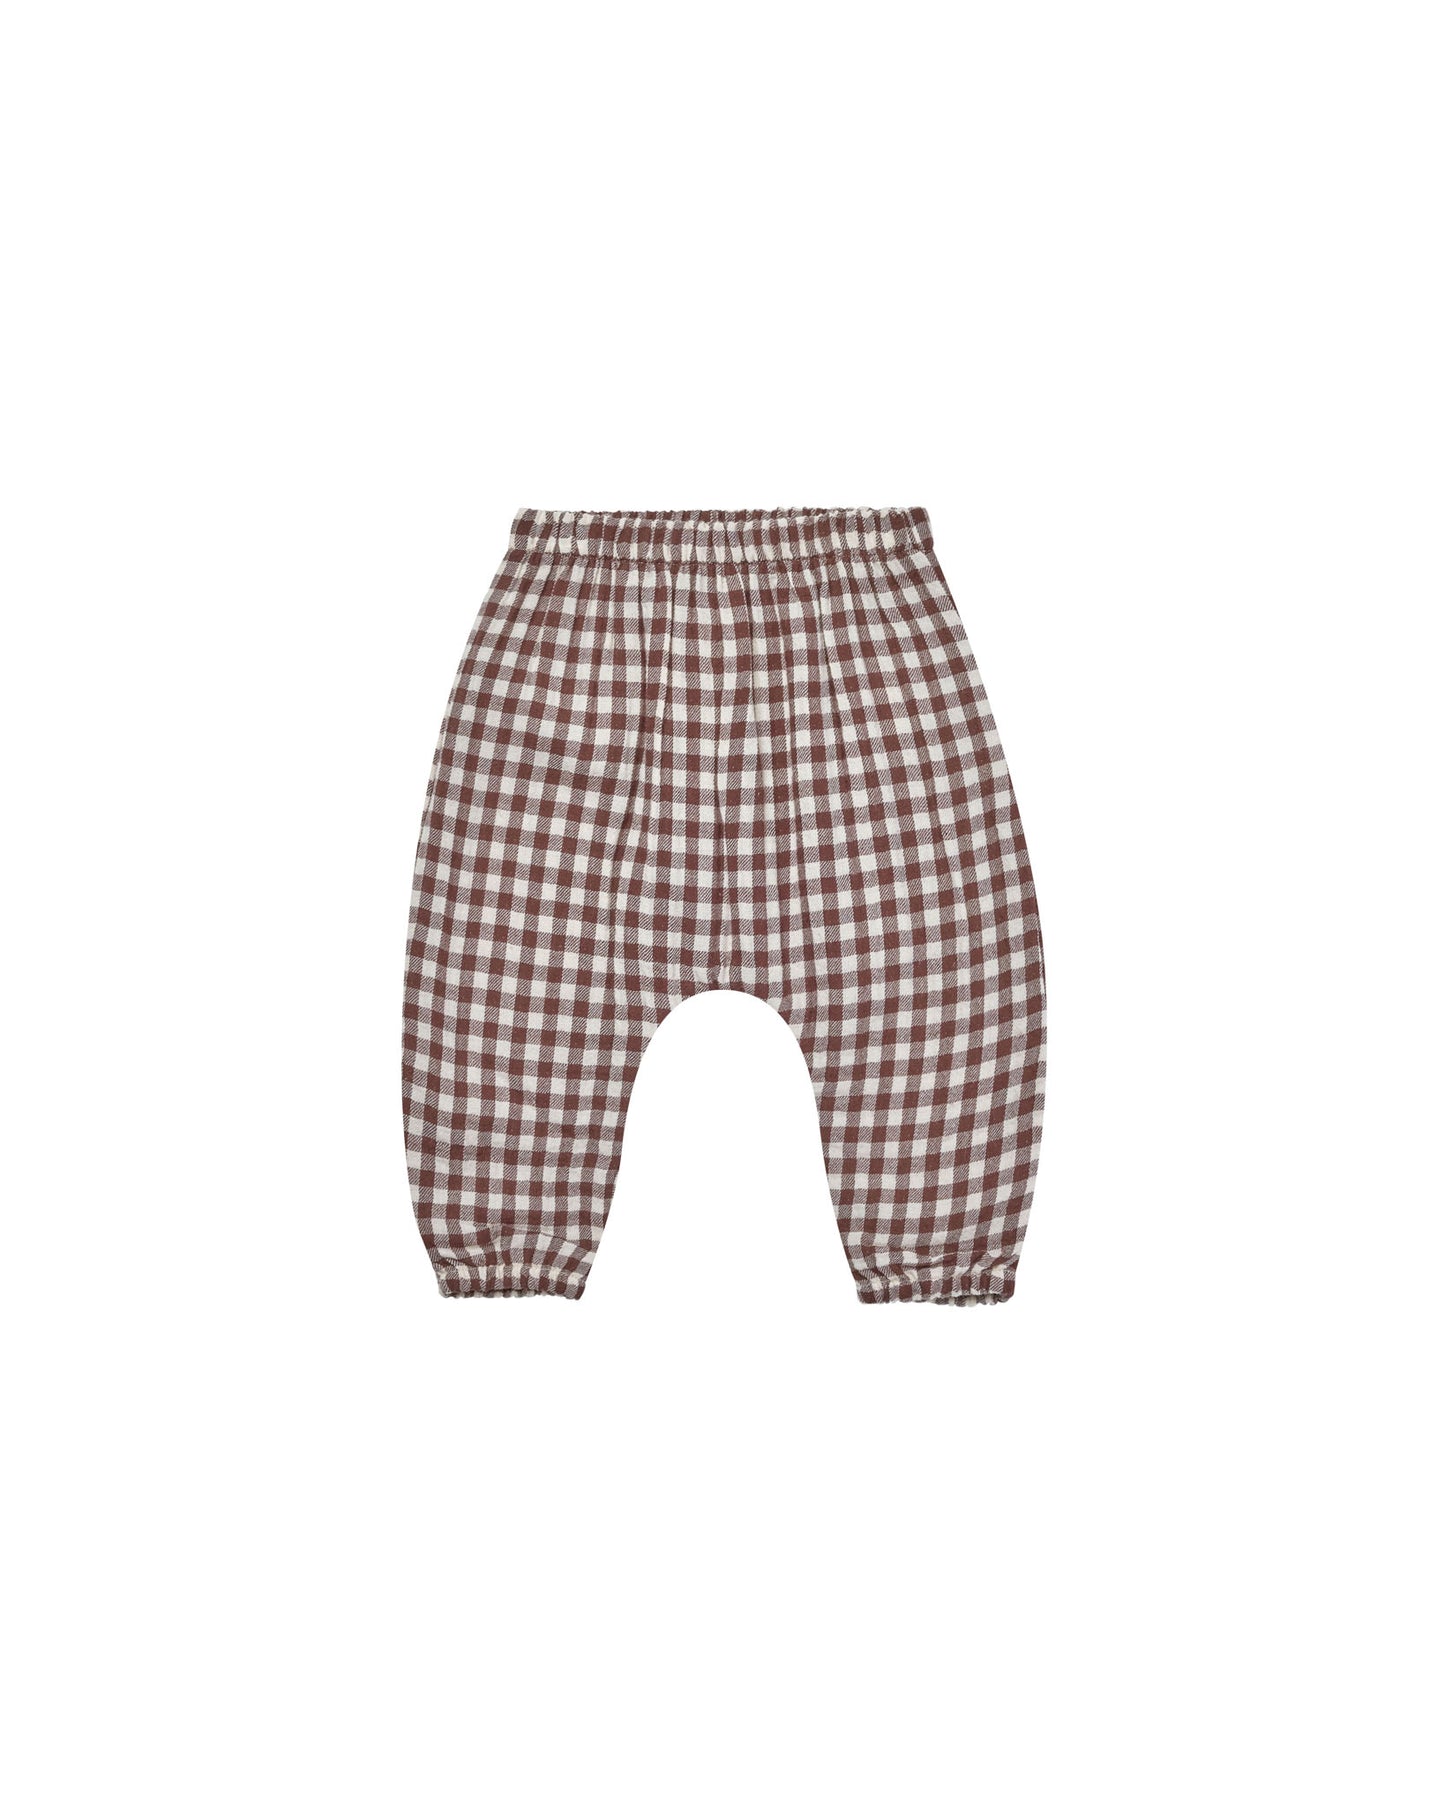 Quincy Mae - Woven Pant - Plum Gingham